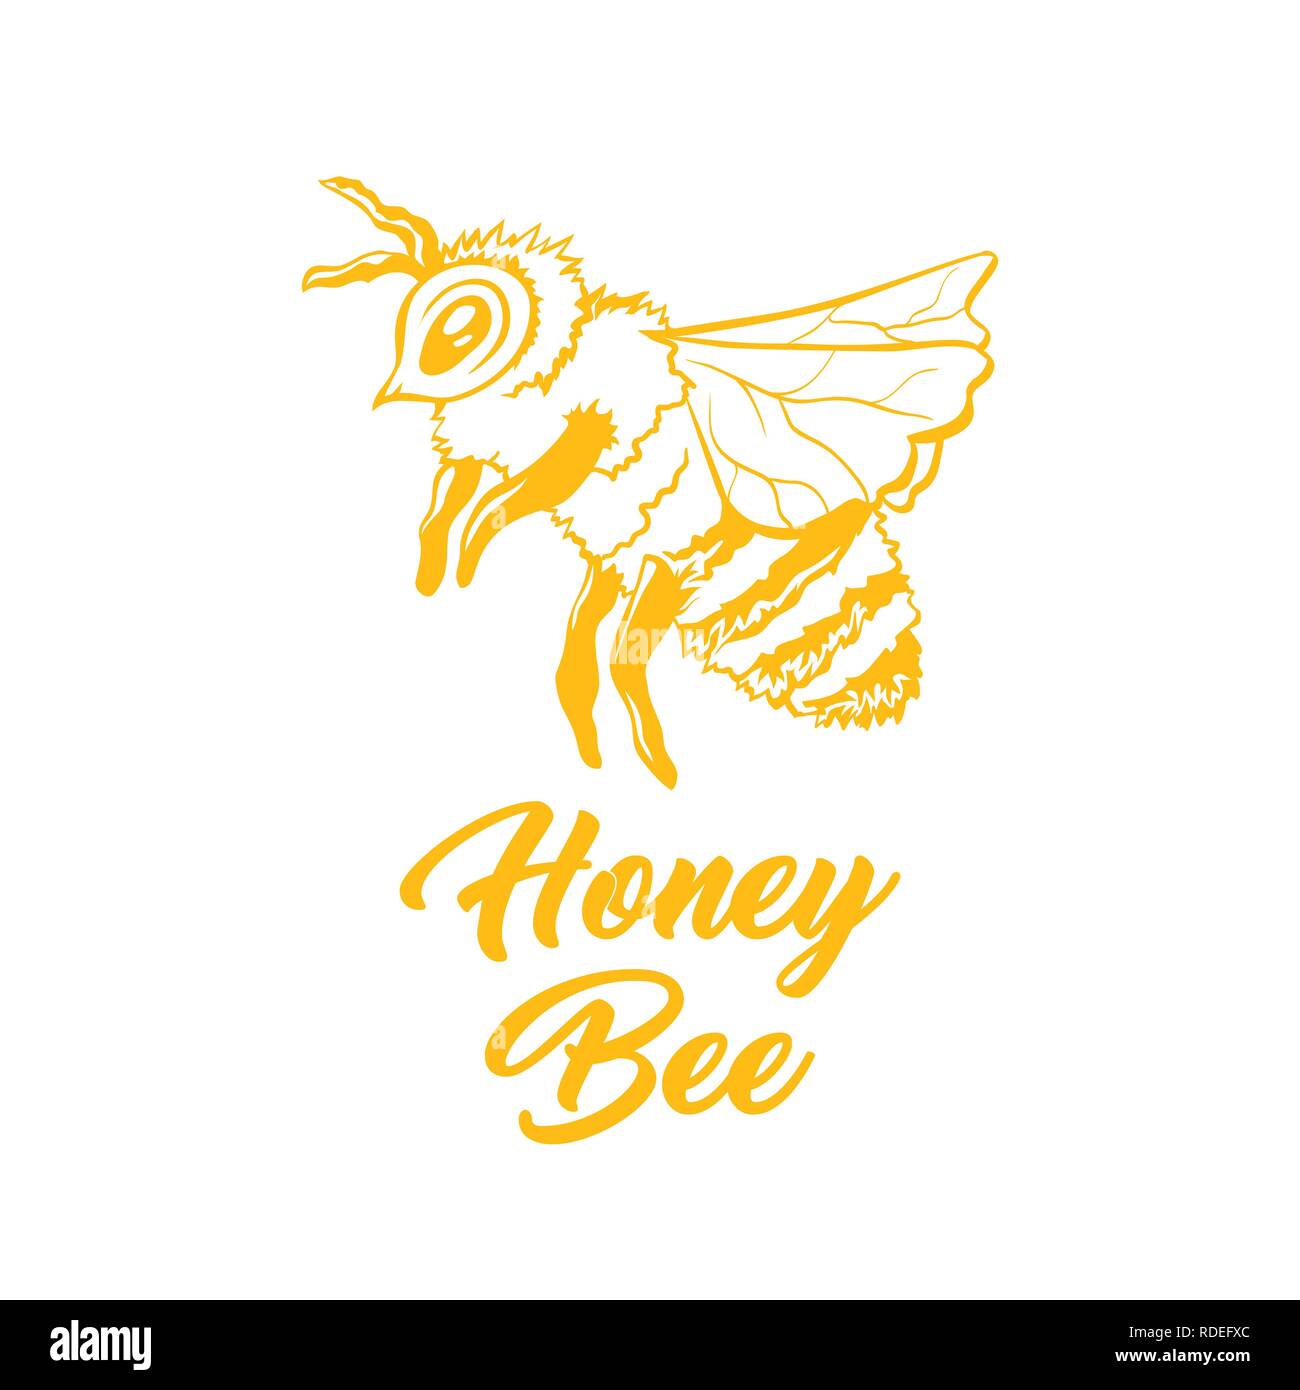 Honey Bee, Outline Logo Design. Isolated Vector. Yellow Engraved Element. Vintage Style Illustration of Flying Wasp Stock Vector